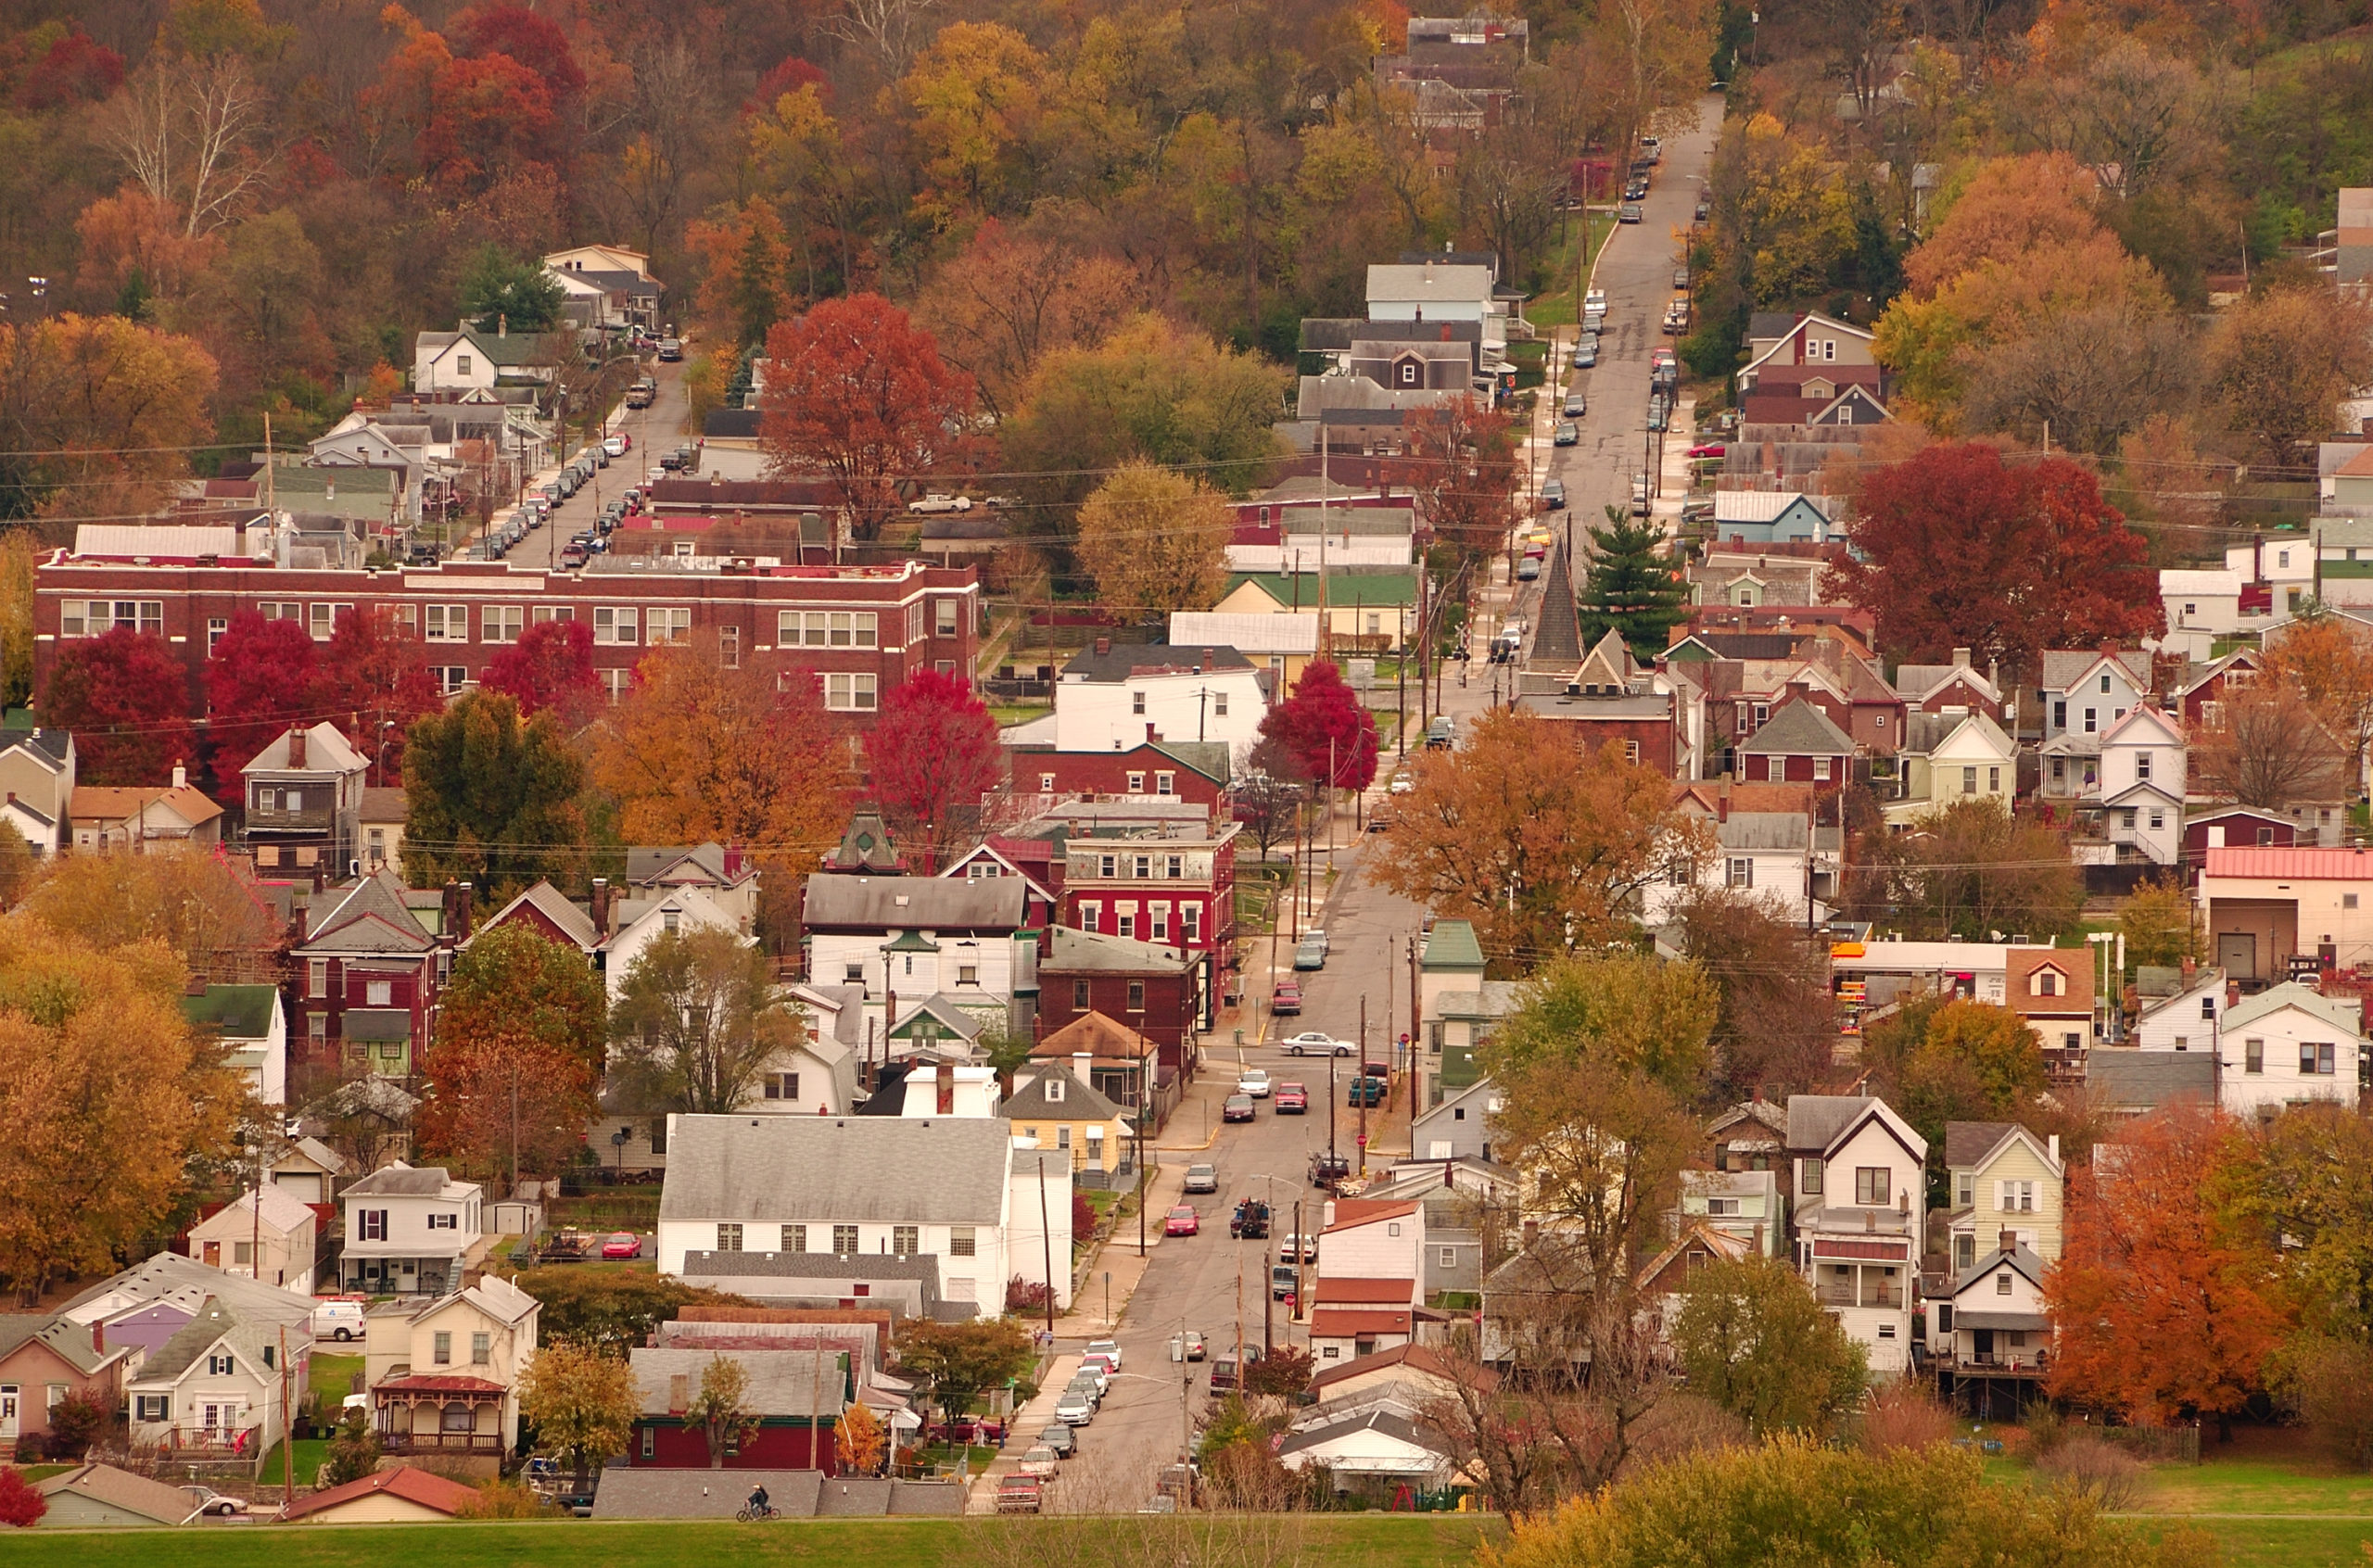 River,Town,Usa,-,Aerial,View,Of,Autumn,In,A